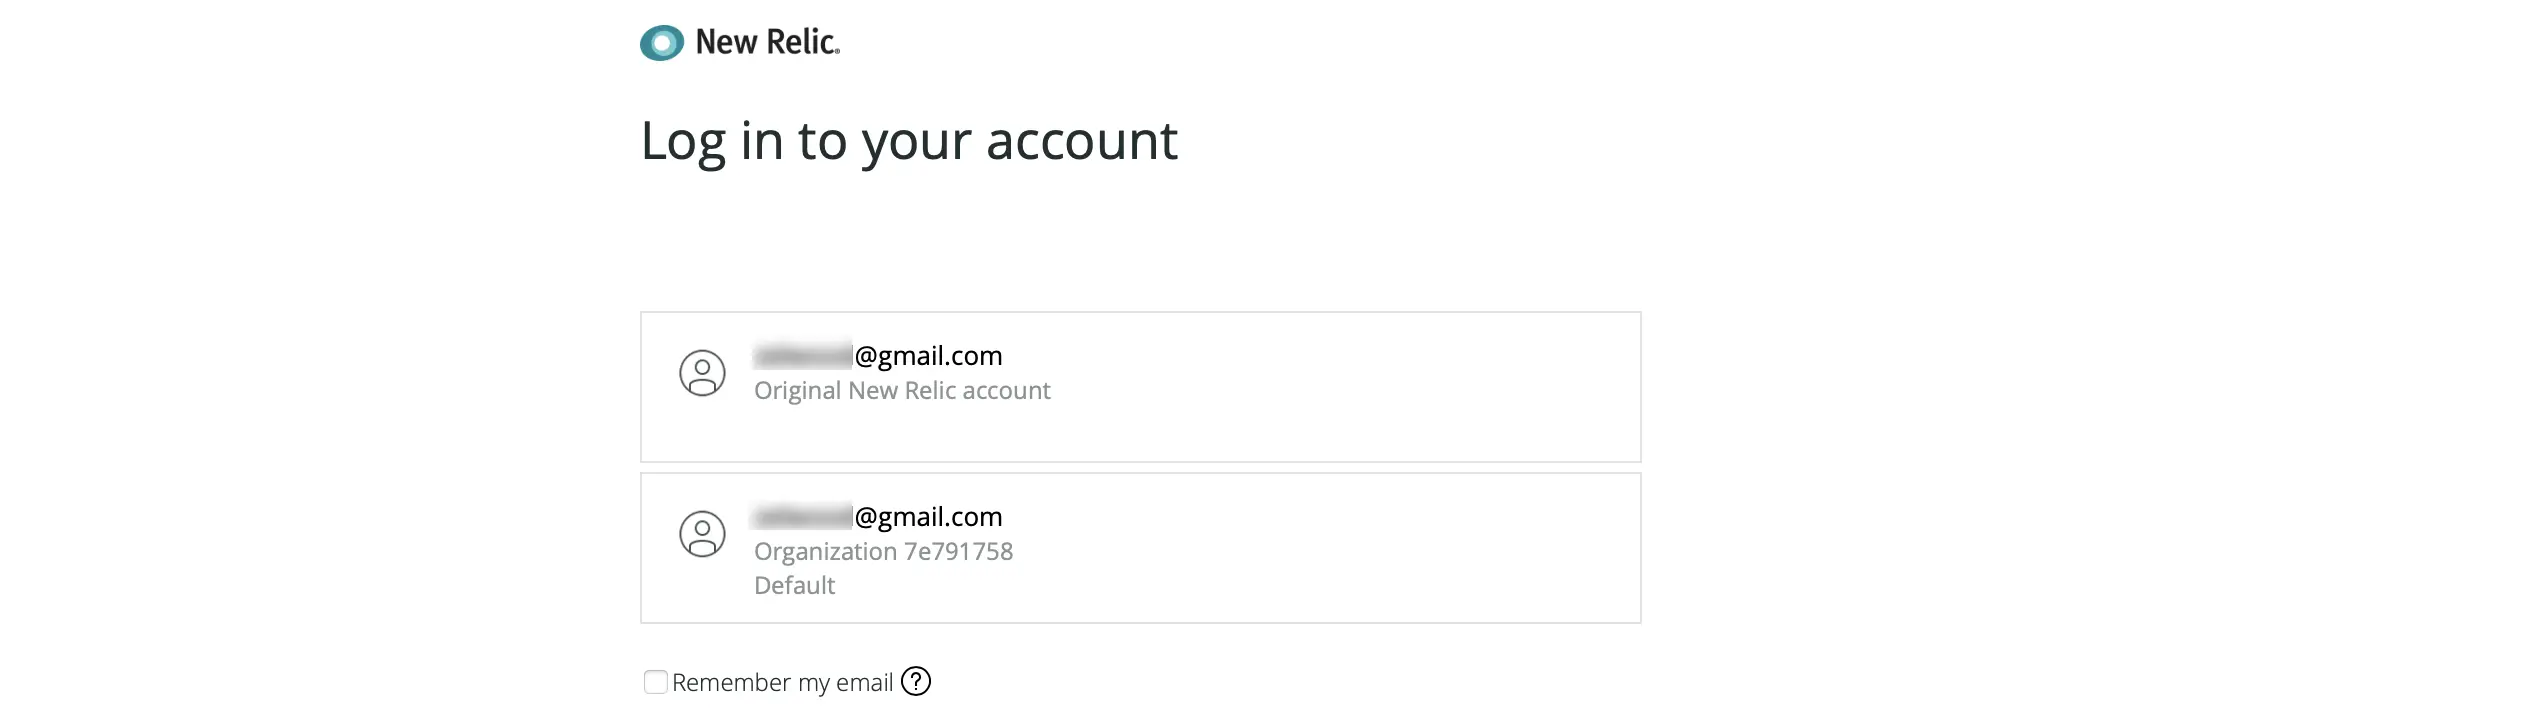 A screenshot of what is shown when you have an email address associated with multiple New Relic logins